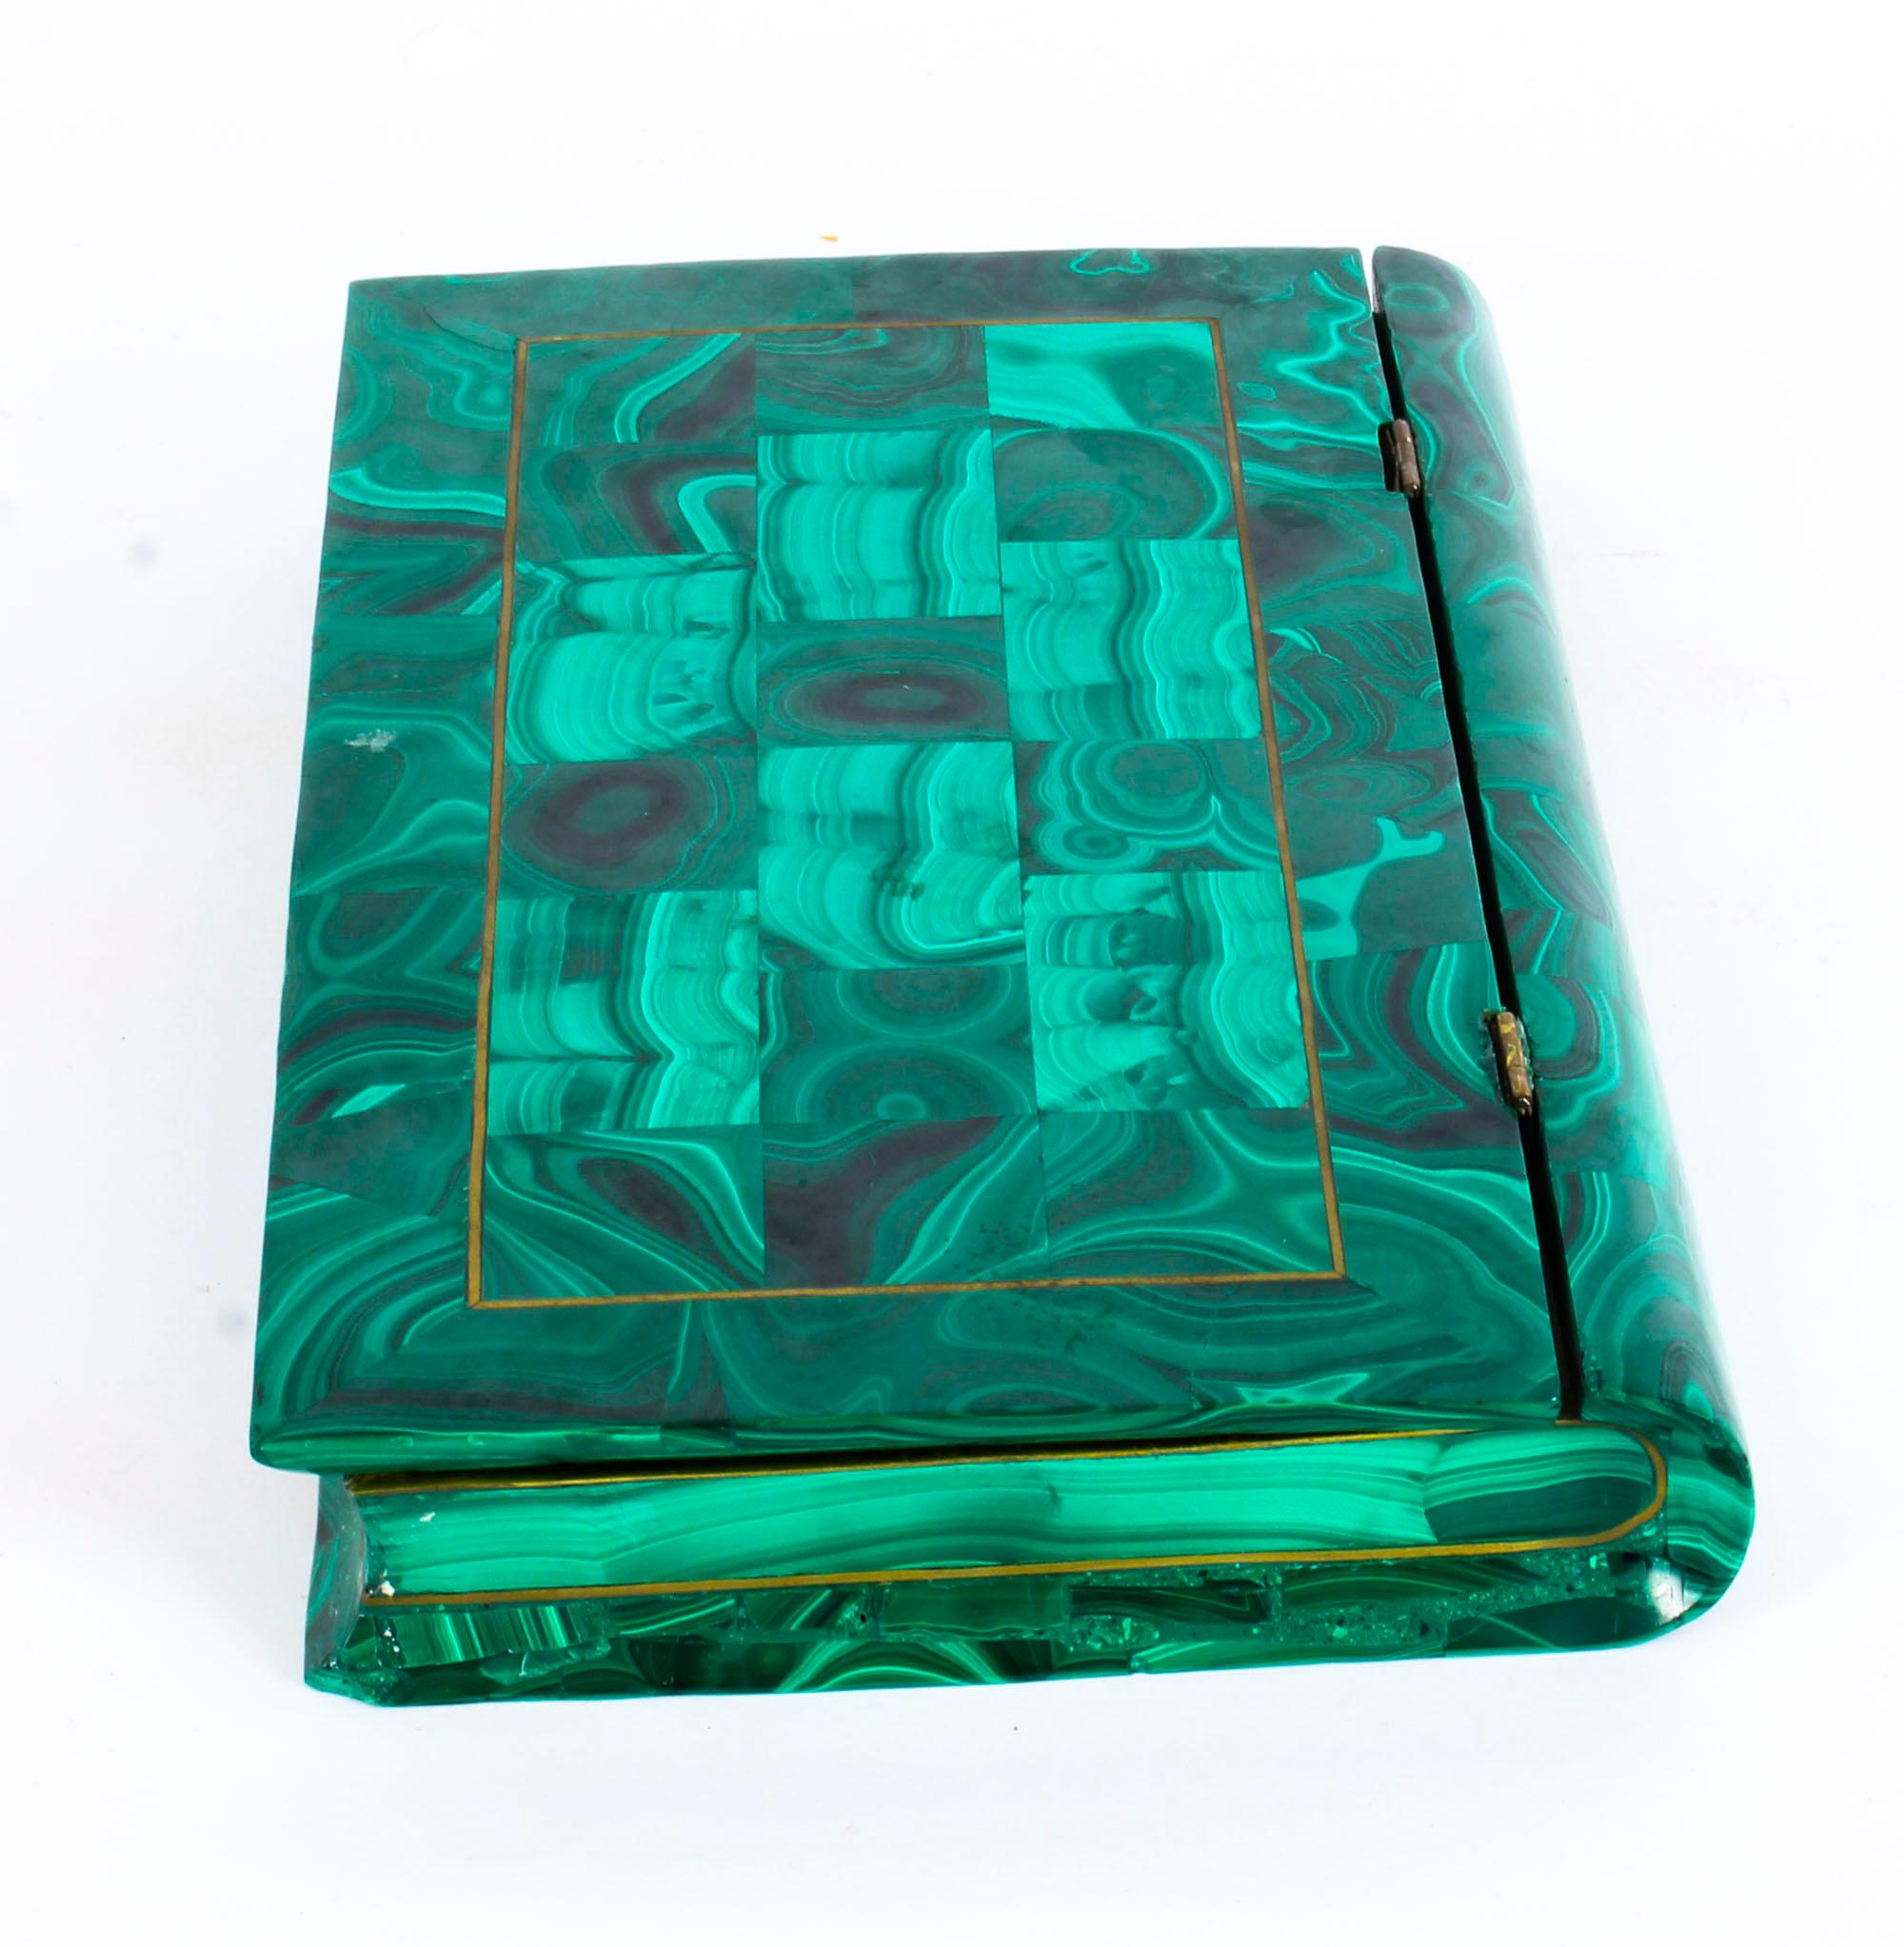 This is a superb quality Russian antique malachite book form jewel box, circa 1900 in date, later converted to display a quantity of mineral specimens.

The rectangular hinged lid features malachite parquetry with decorative brass stringing. It